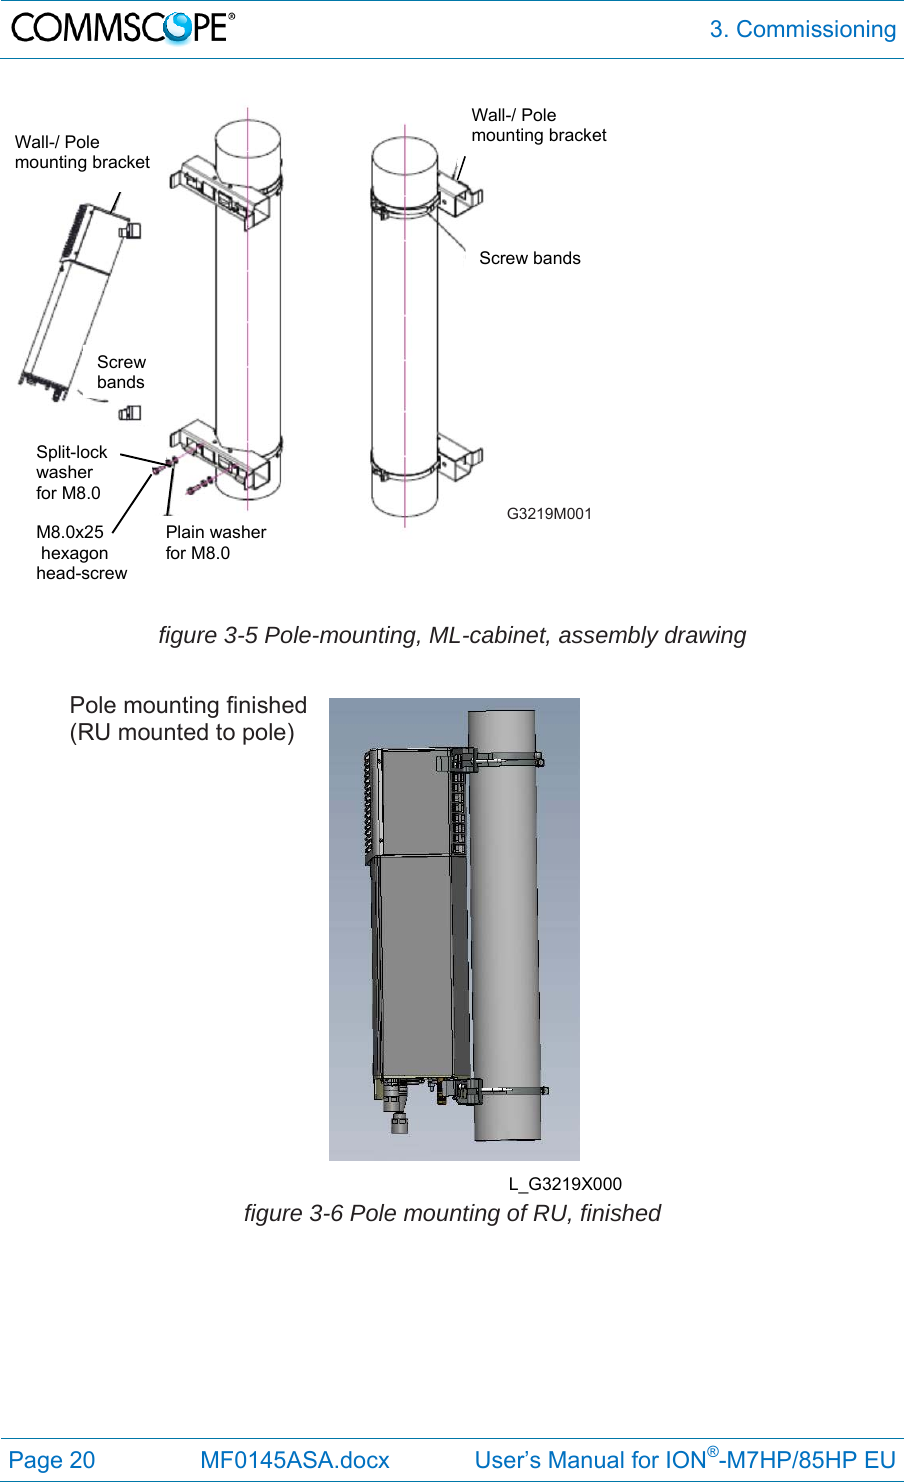  3. Commissioning Page 20  MF0145ASA.docx             User’s Manual for ION®-M7HP/85HP EU    figure 3-5 Pole-mounting, ML-cabinet, assembly drawing    figure 3-6 Pole mounting of RU, finished   L_G3219X000 Pole mounting finished (RU mounted to pole) G3219M001 Wall-/ Pole  mounting bracket Screw bands Plain washer for M8.0 Split-lock washer  for M8.0 M8.0x25  hexagon  head-screw Wall-/ Pole  mounting bracket Screw  bands   